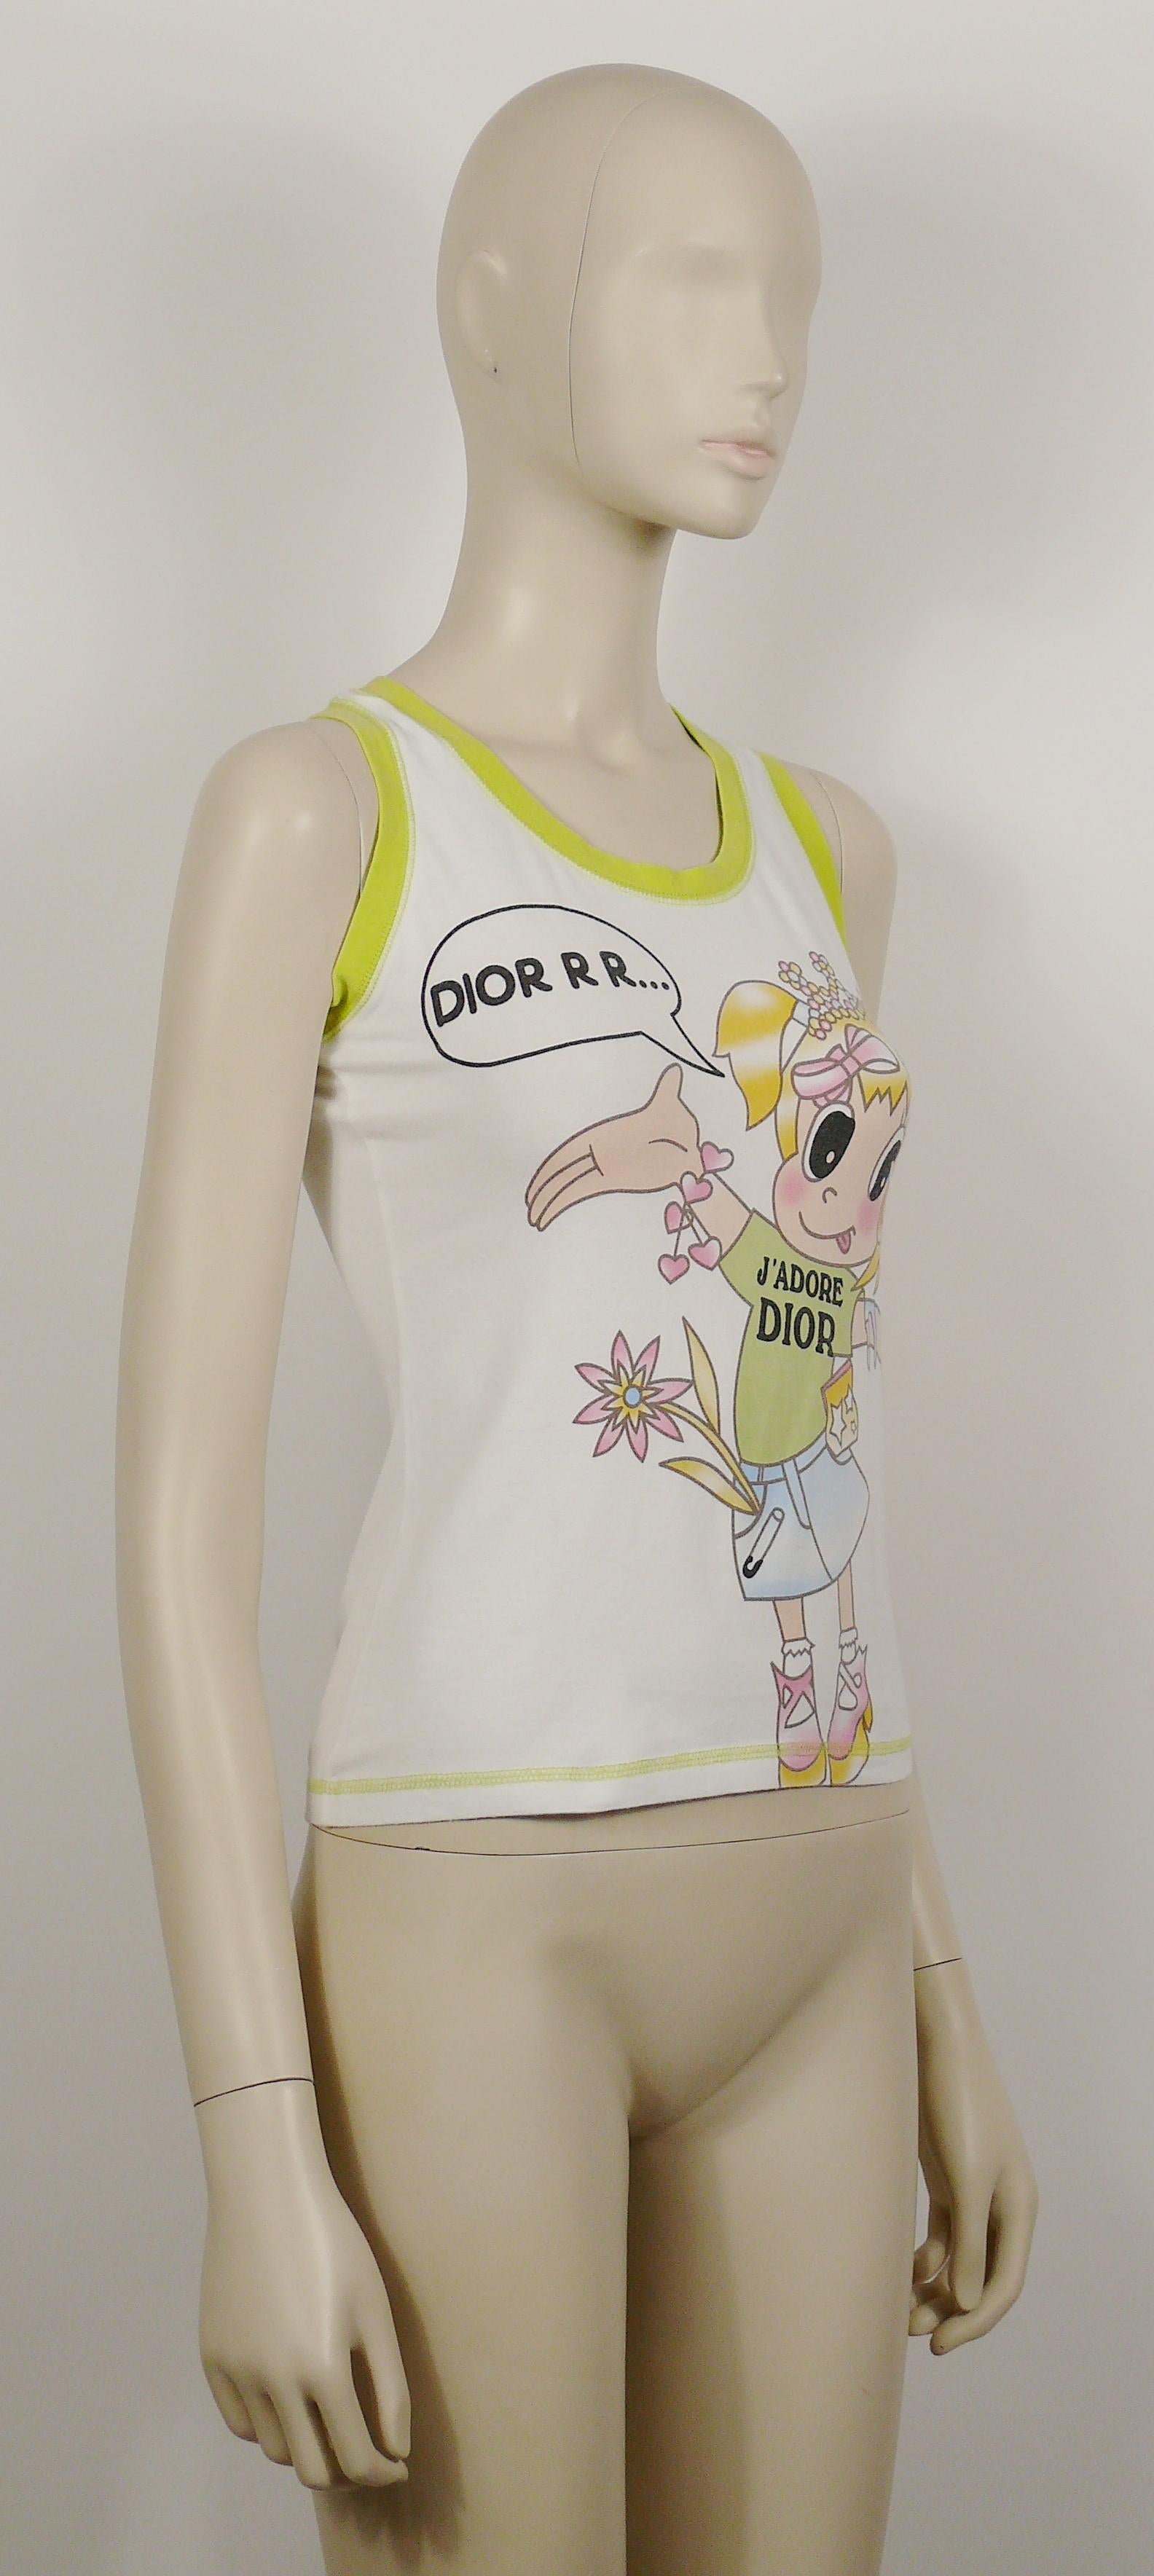 CHRISTIAN DIOR by JOHN GALLIANO J'ADORE DIOR cartoon tank top.

From the Spring/Summer Ready-to-Wear 2005 Collection.

Similar model worn by BELLA HADID (see photo 5).

Label reads CHRISTIAN DIOR BOUTIQUE Paris.
Made in France.

Size tag reads : F